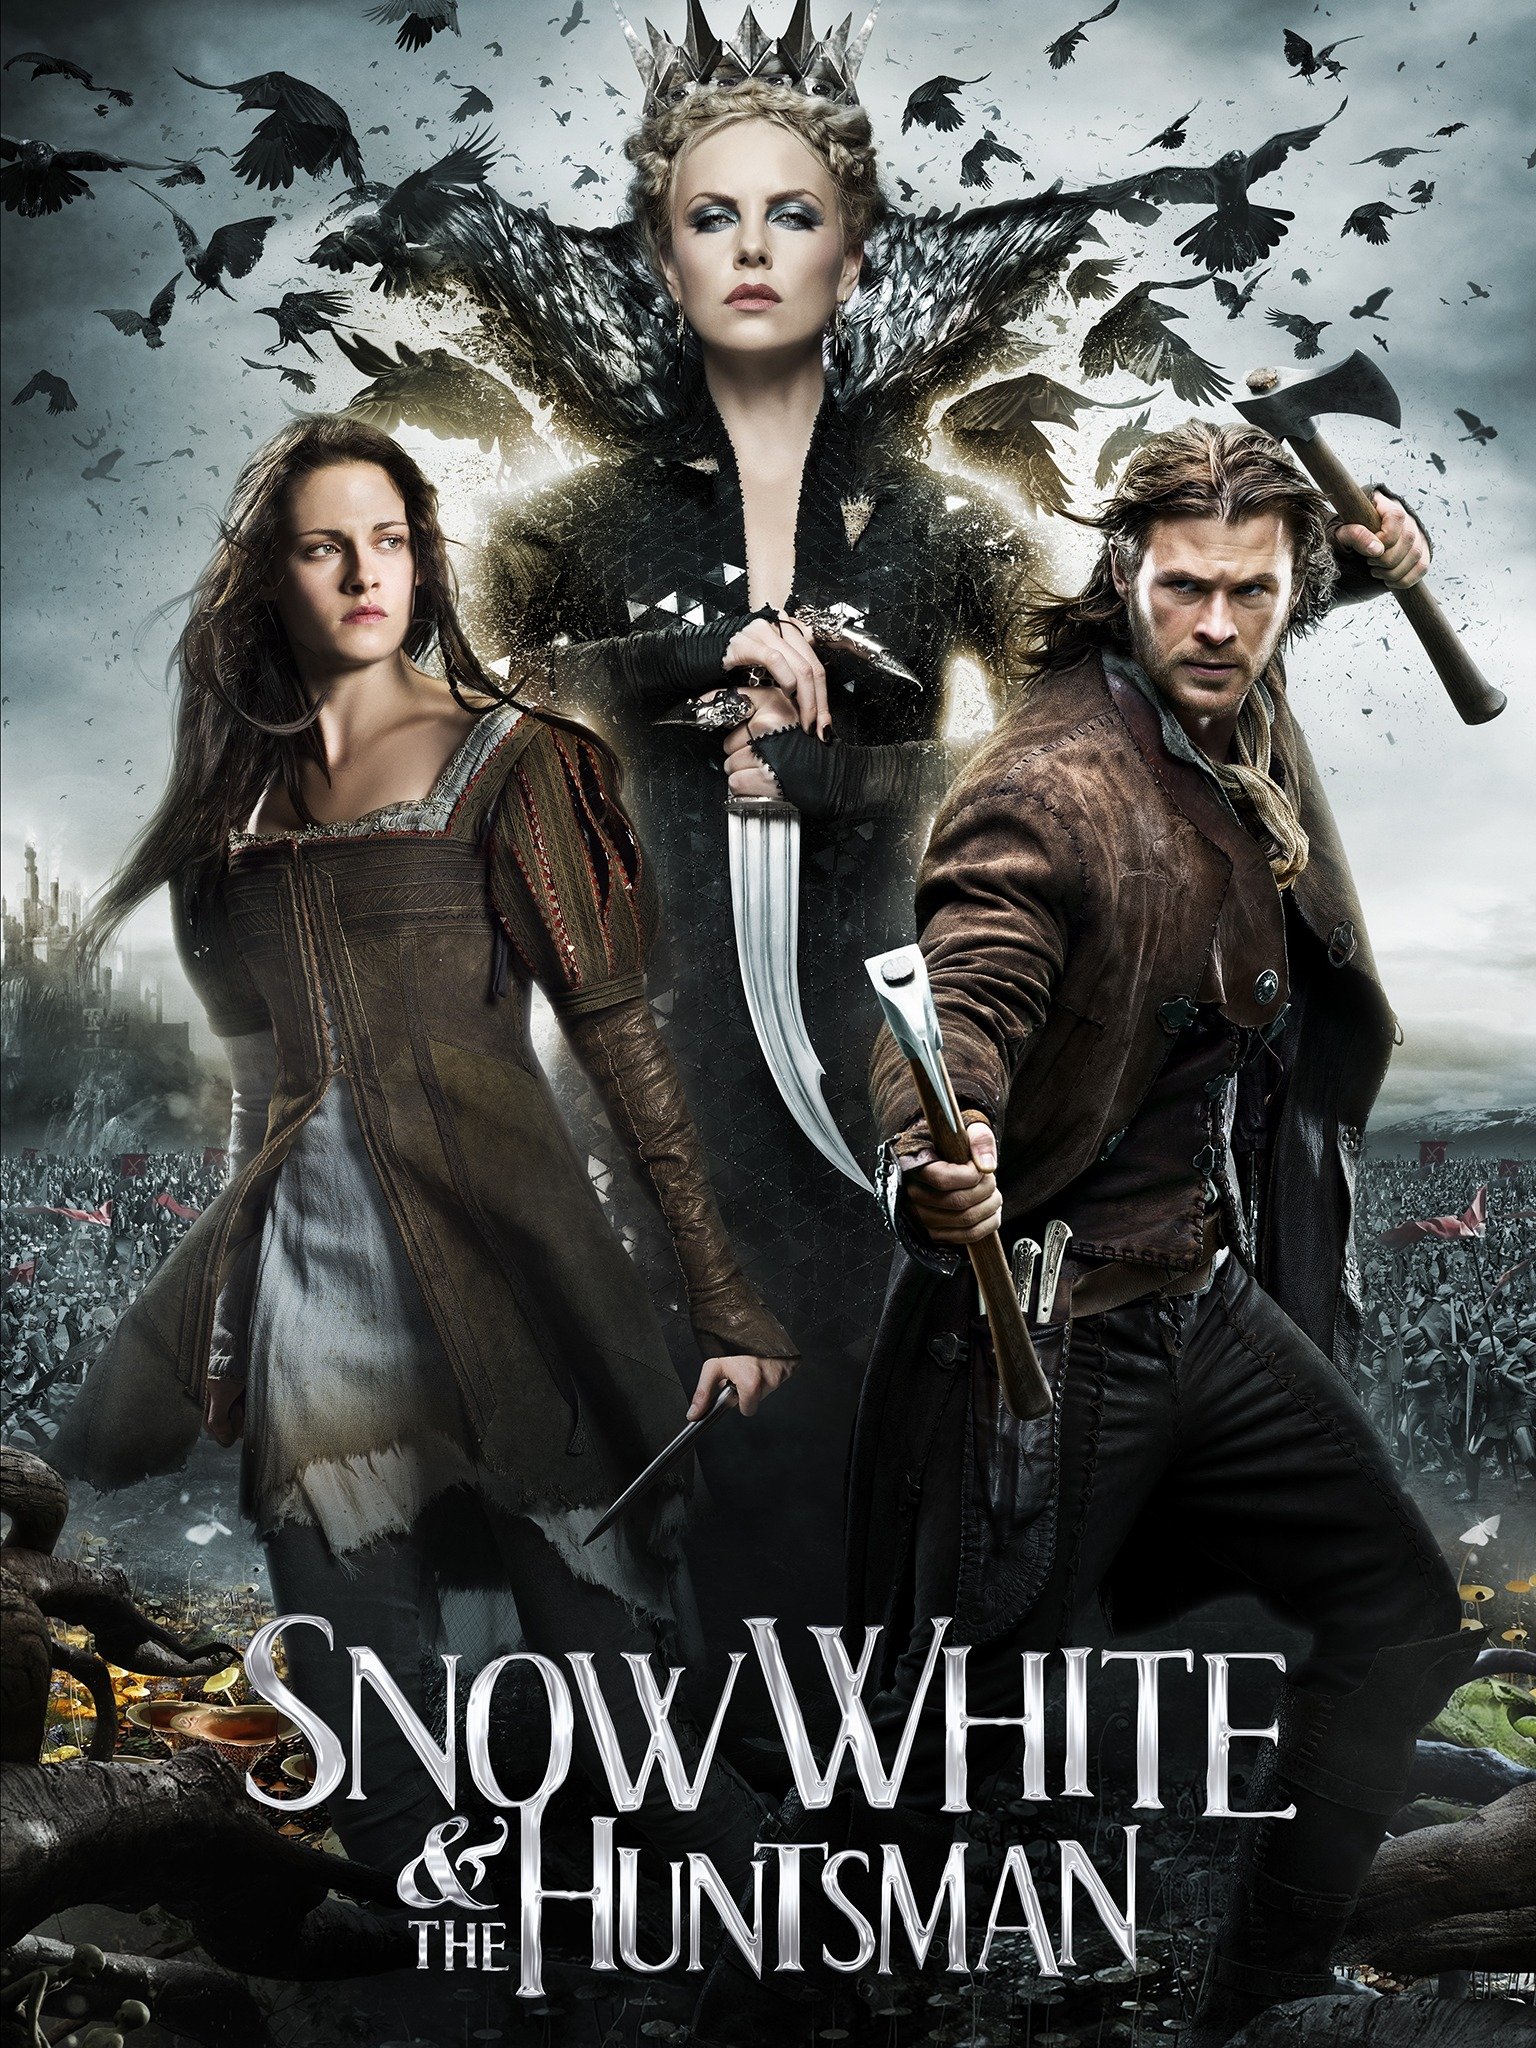 Snow White and the Huntsman adaptation